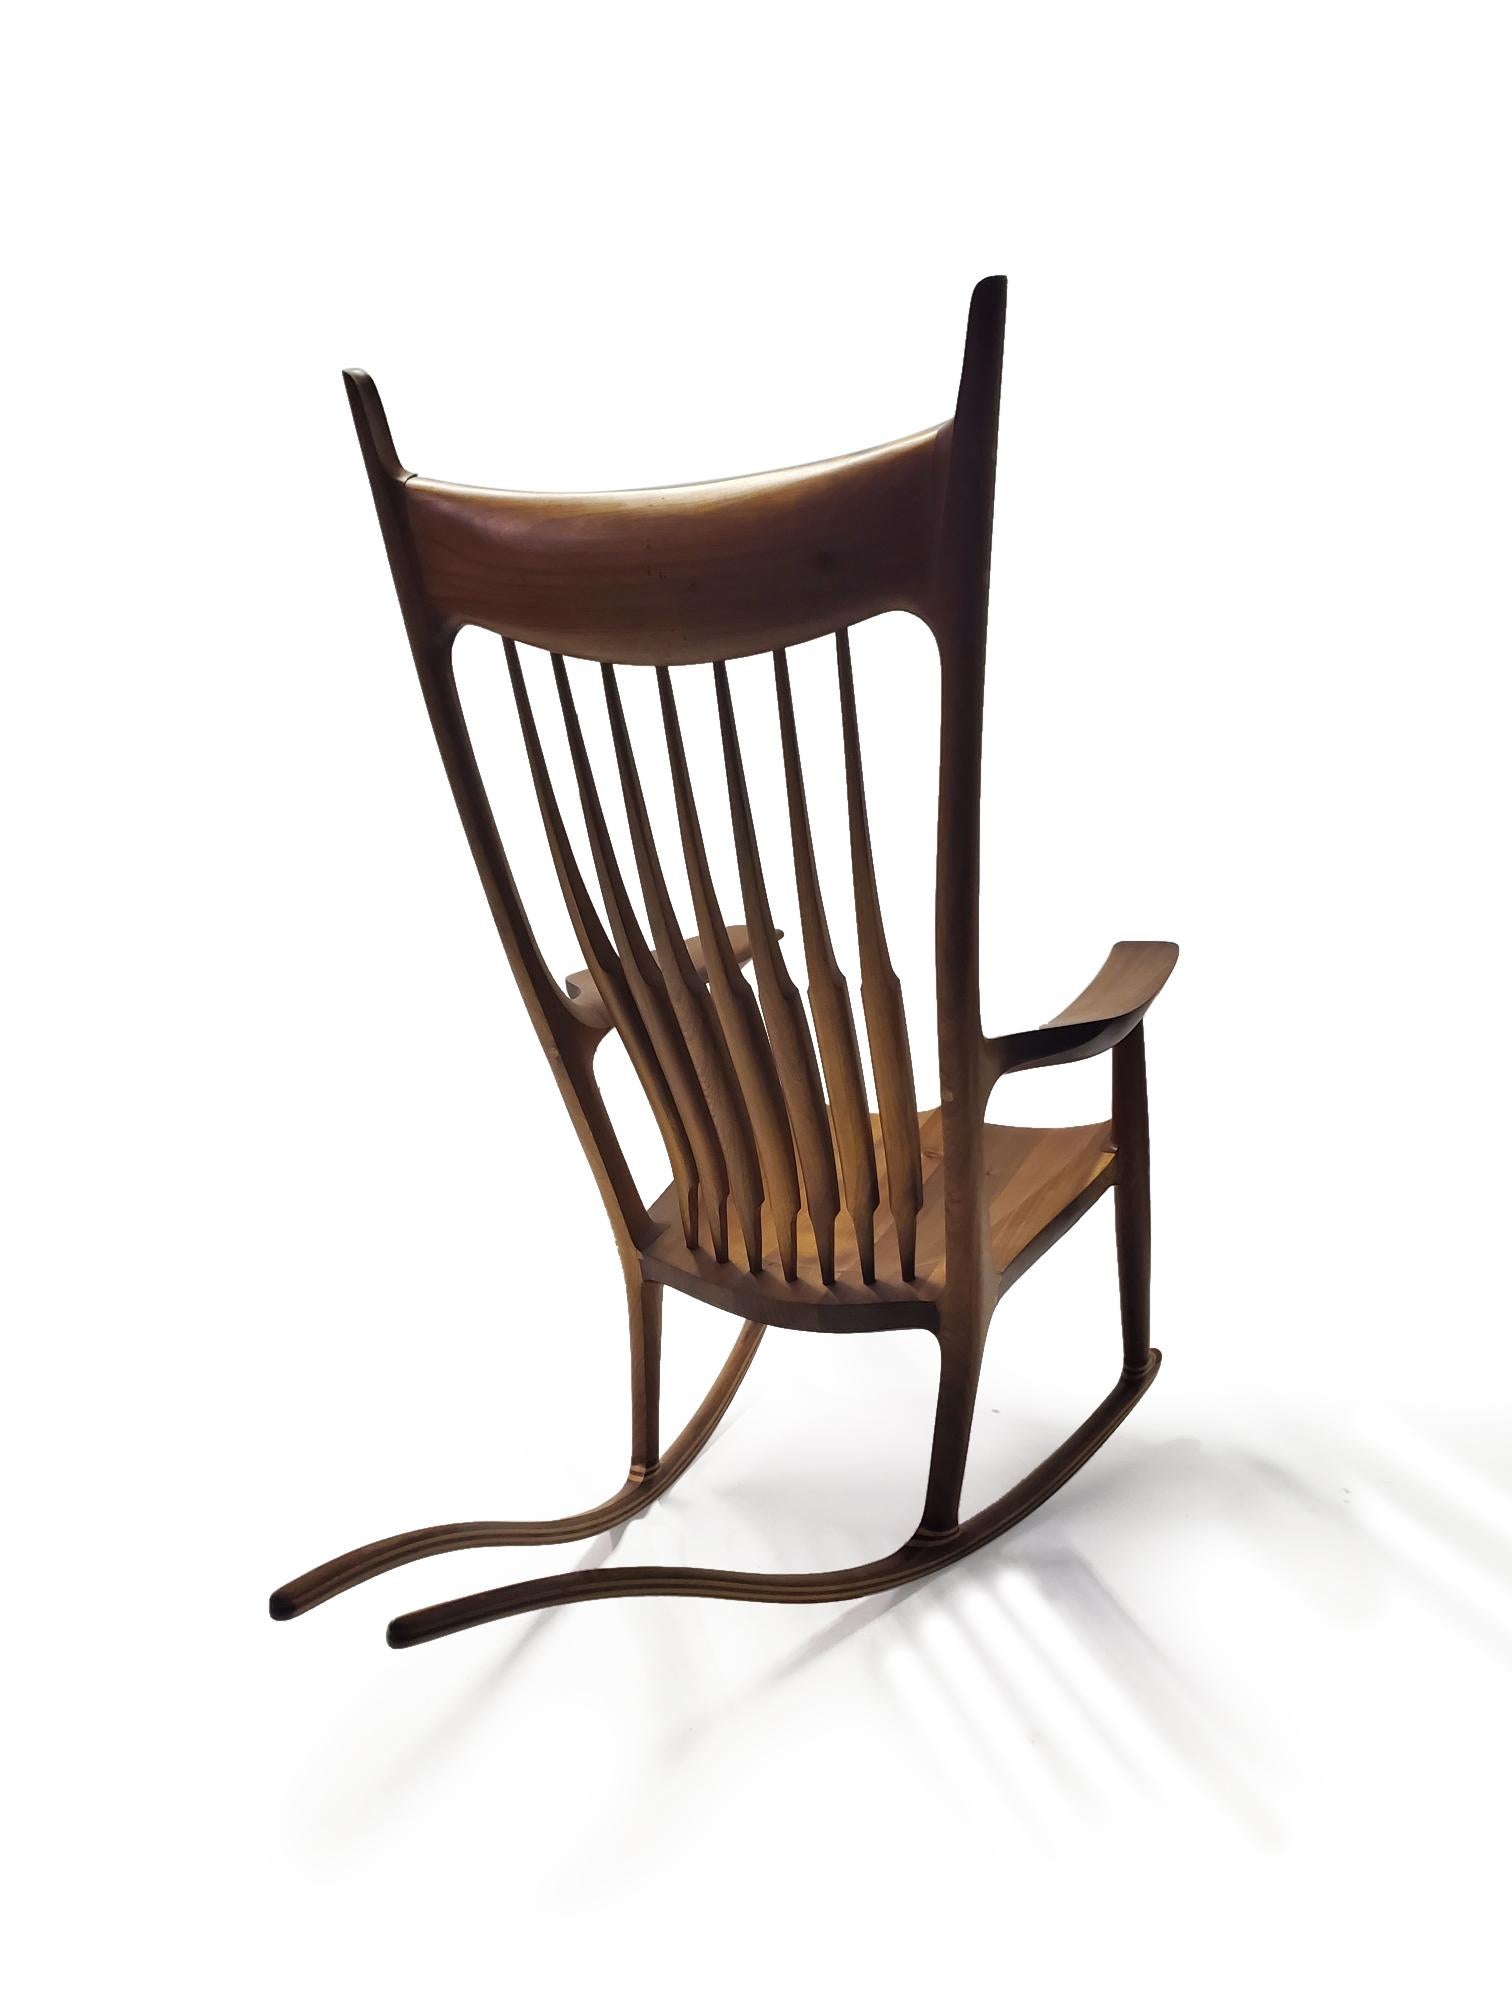 sam maloof chair for sale